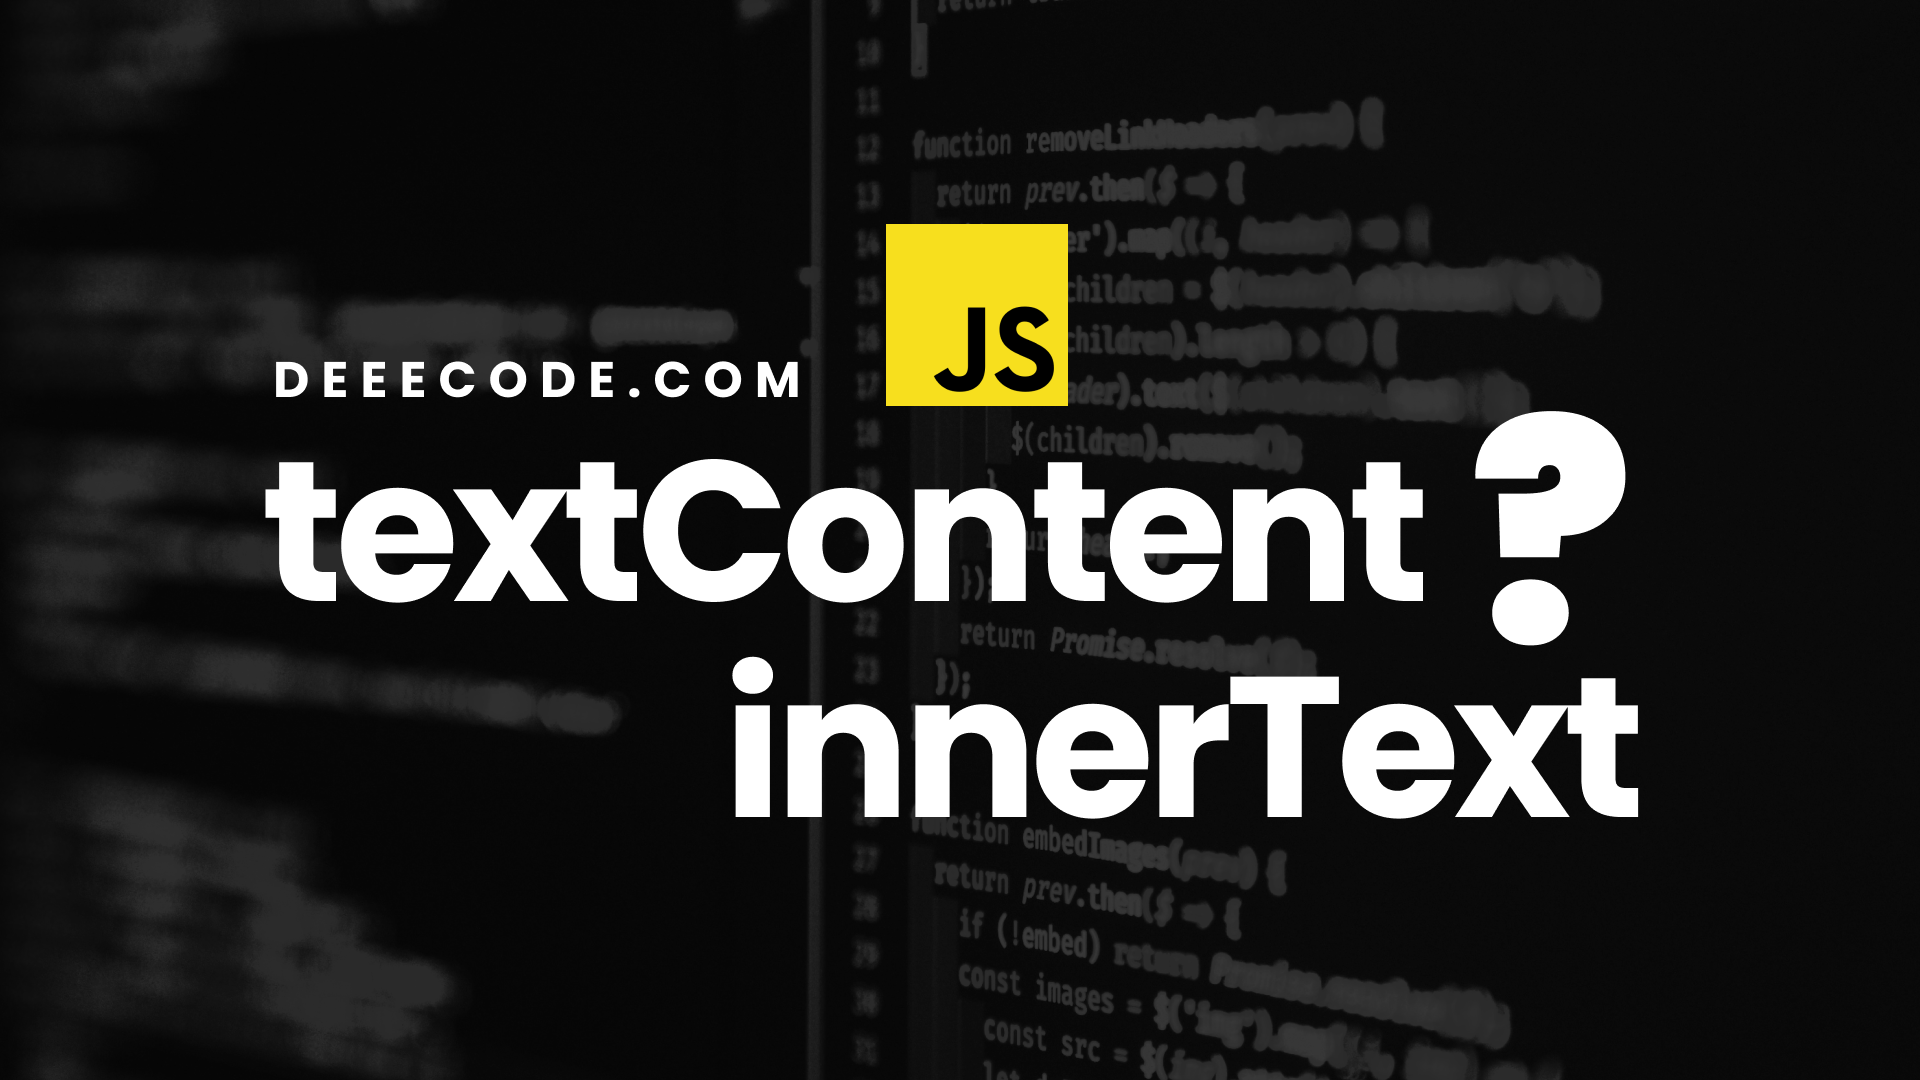 innerText vs textContent - The Differences